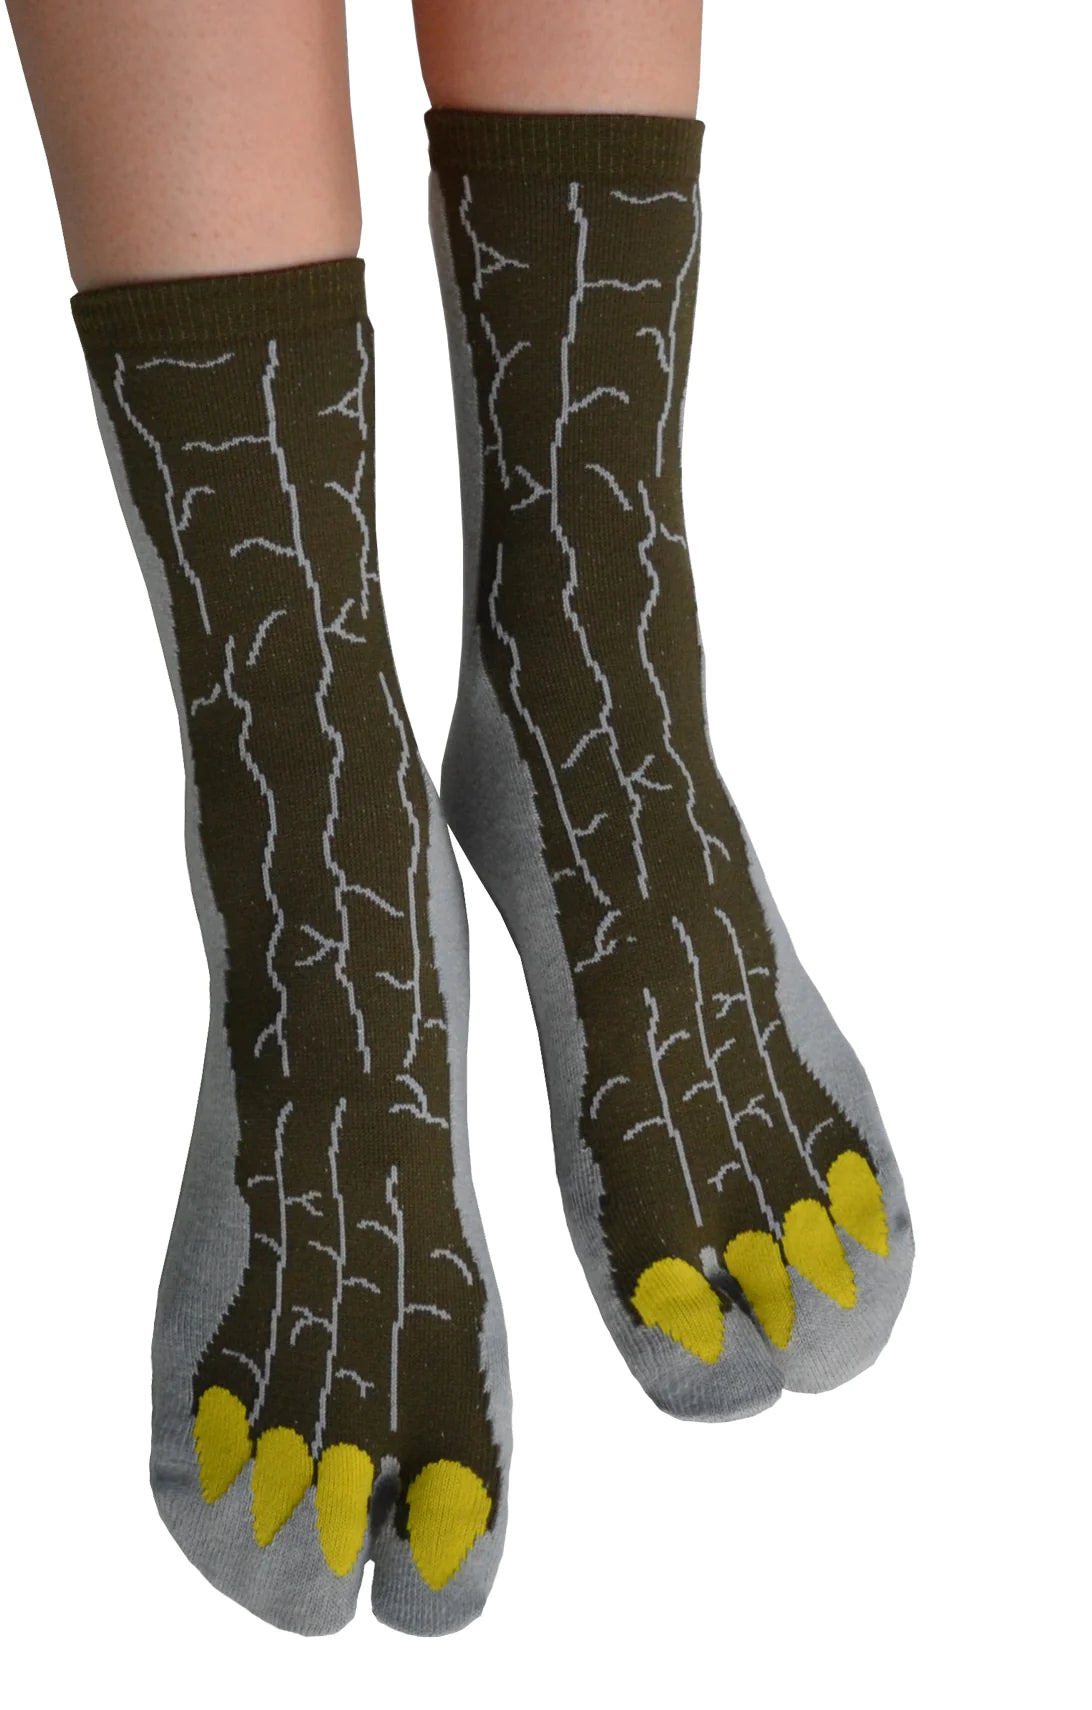 This is a photo of a woman's leg wearing a pair of NINJA SOCKS GODZILLA TABI SOCKS Grey, a product name for the Japanese monster movie Godzilla